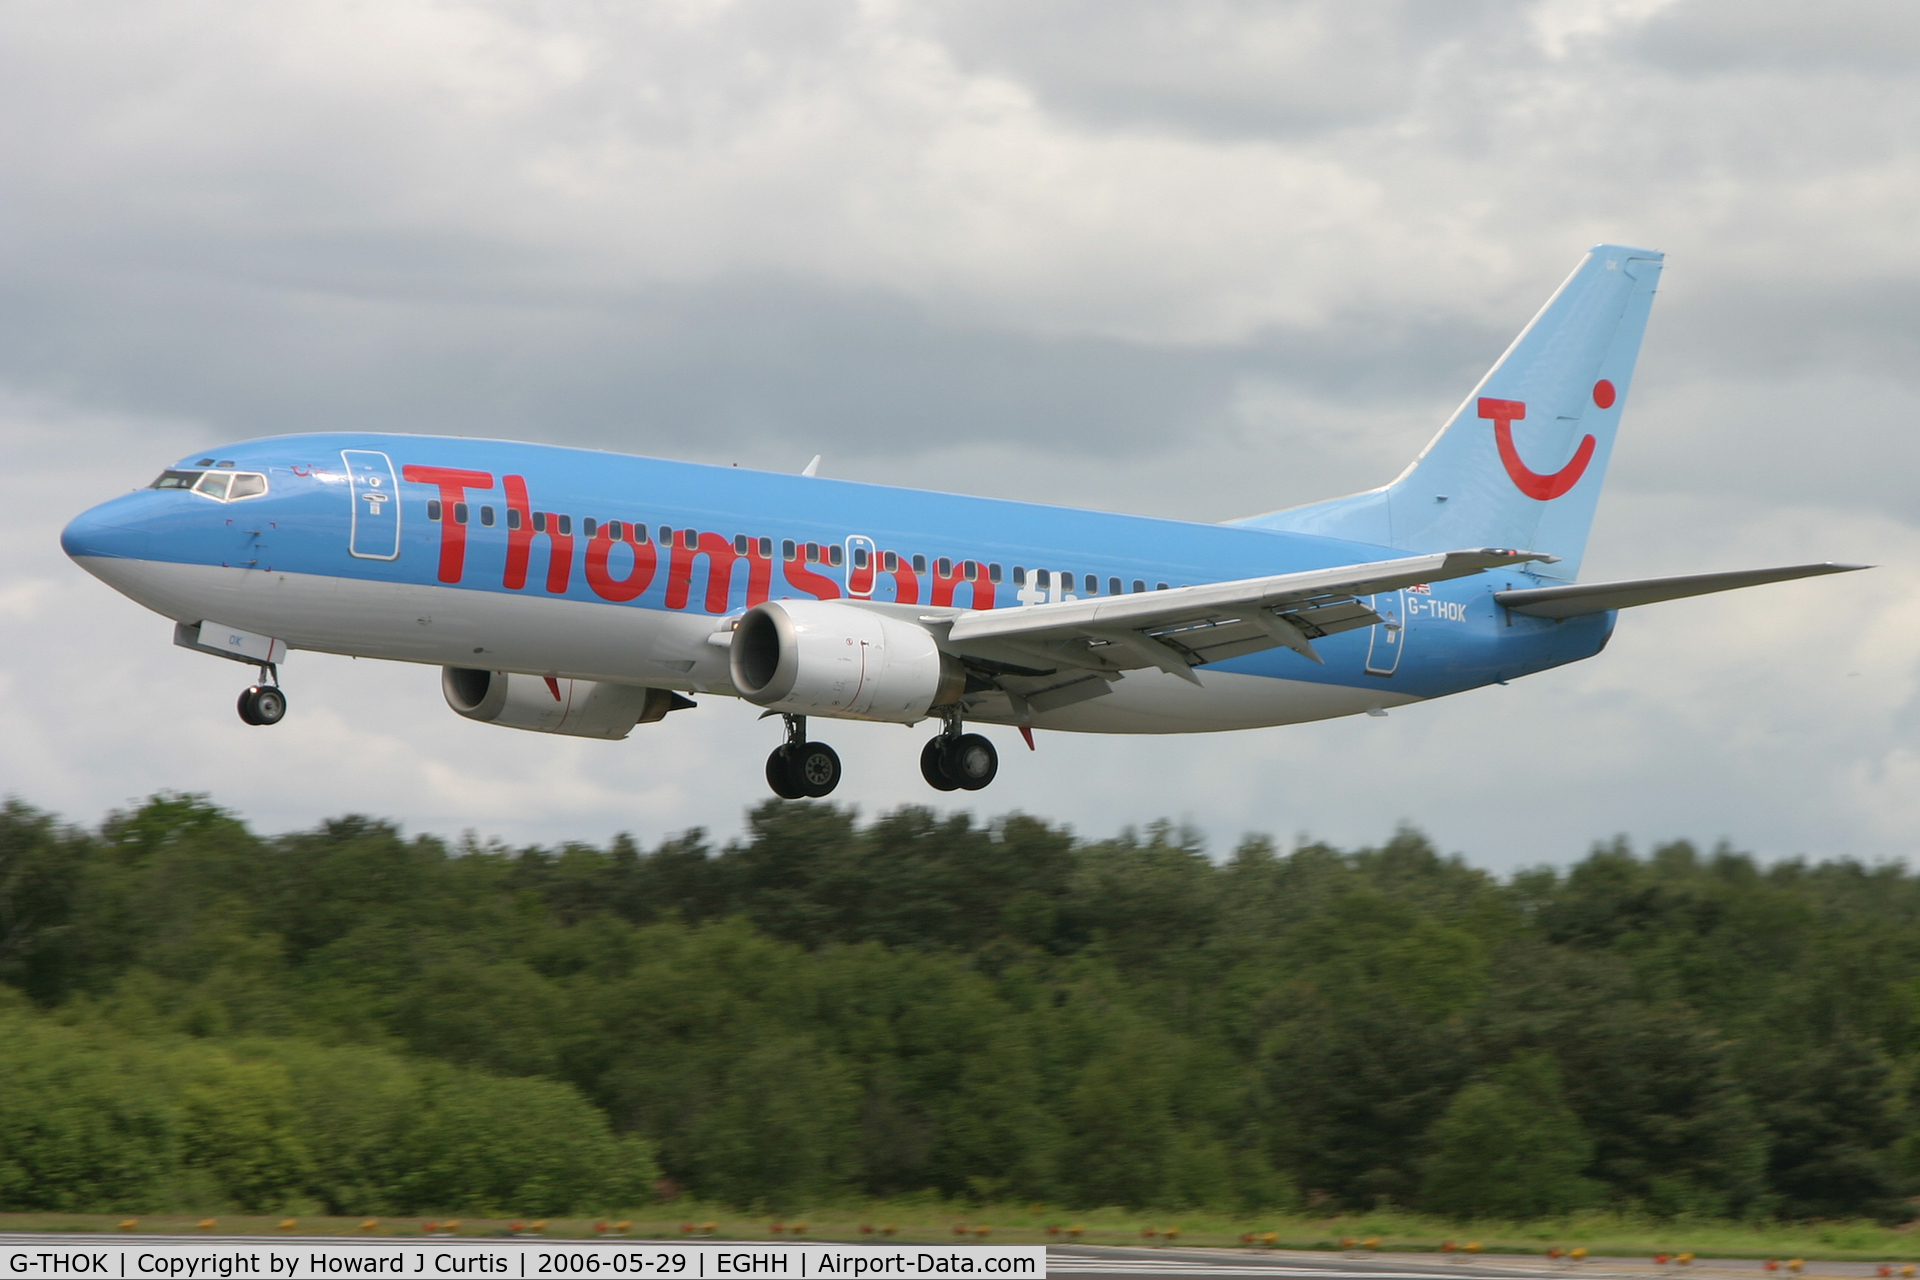 G-THOK, 1997 Boeing 737-36Q C/N 28660, Thomsonfly, on approach to runway 26.